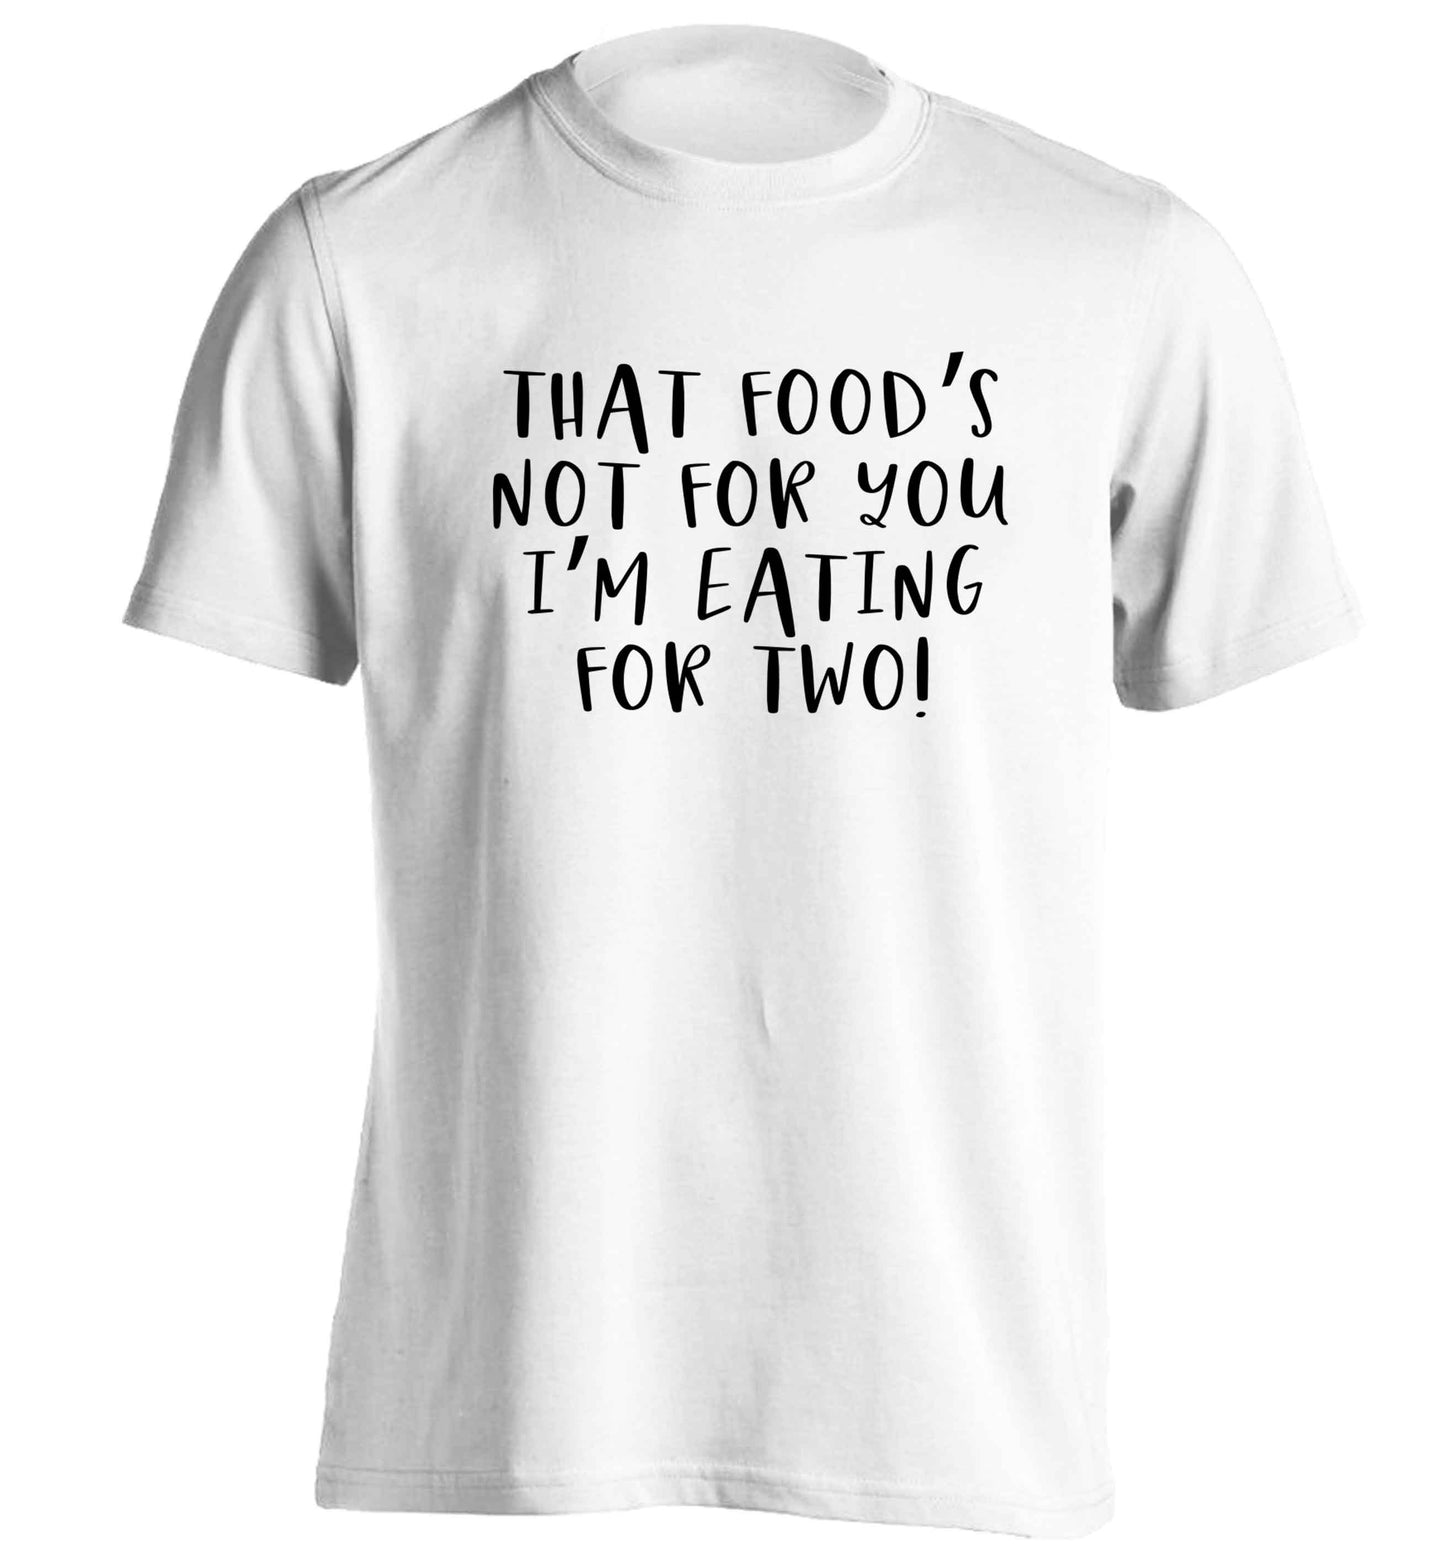 That food's not for you I'm eating for two adults unisex white Tshirt 2XL